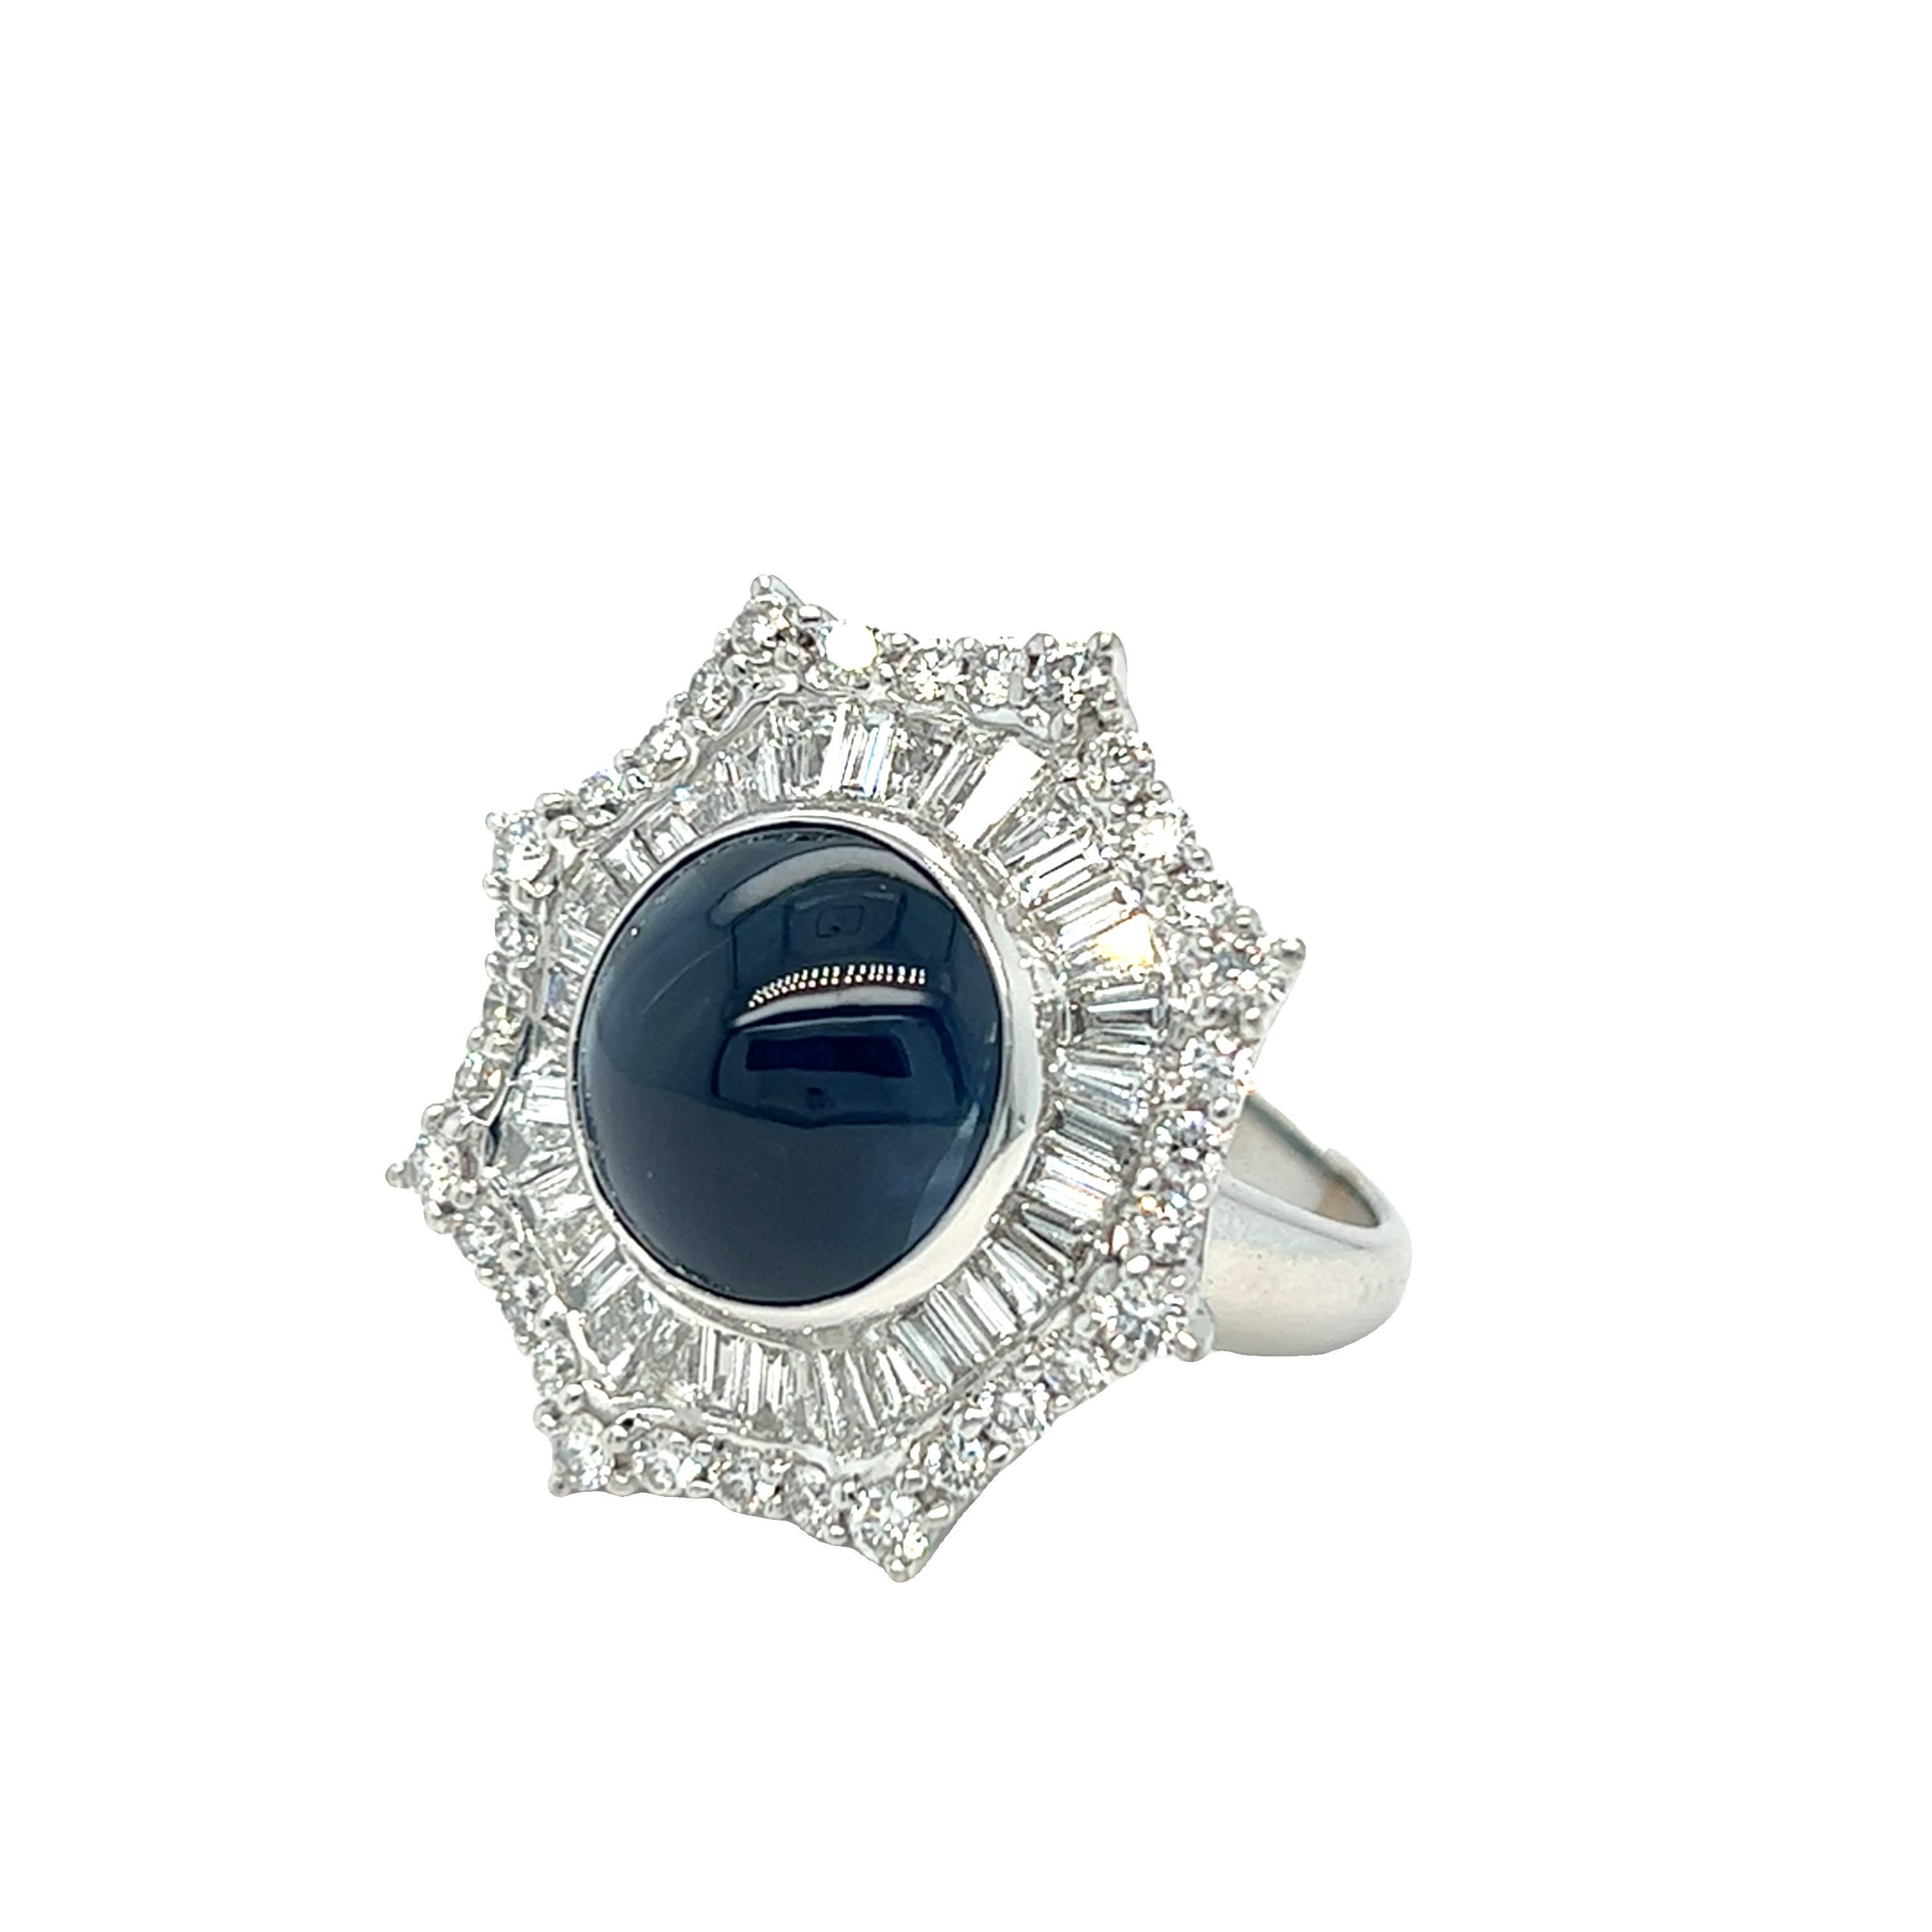 Vintage Starburst Cabochon Sapphire and Diamond Ring In Excellent Condition For Sale In beverly hills, CA